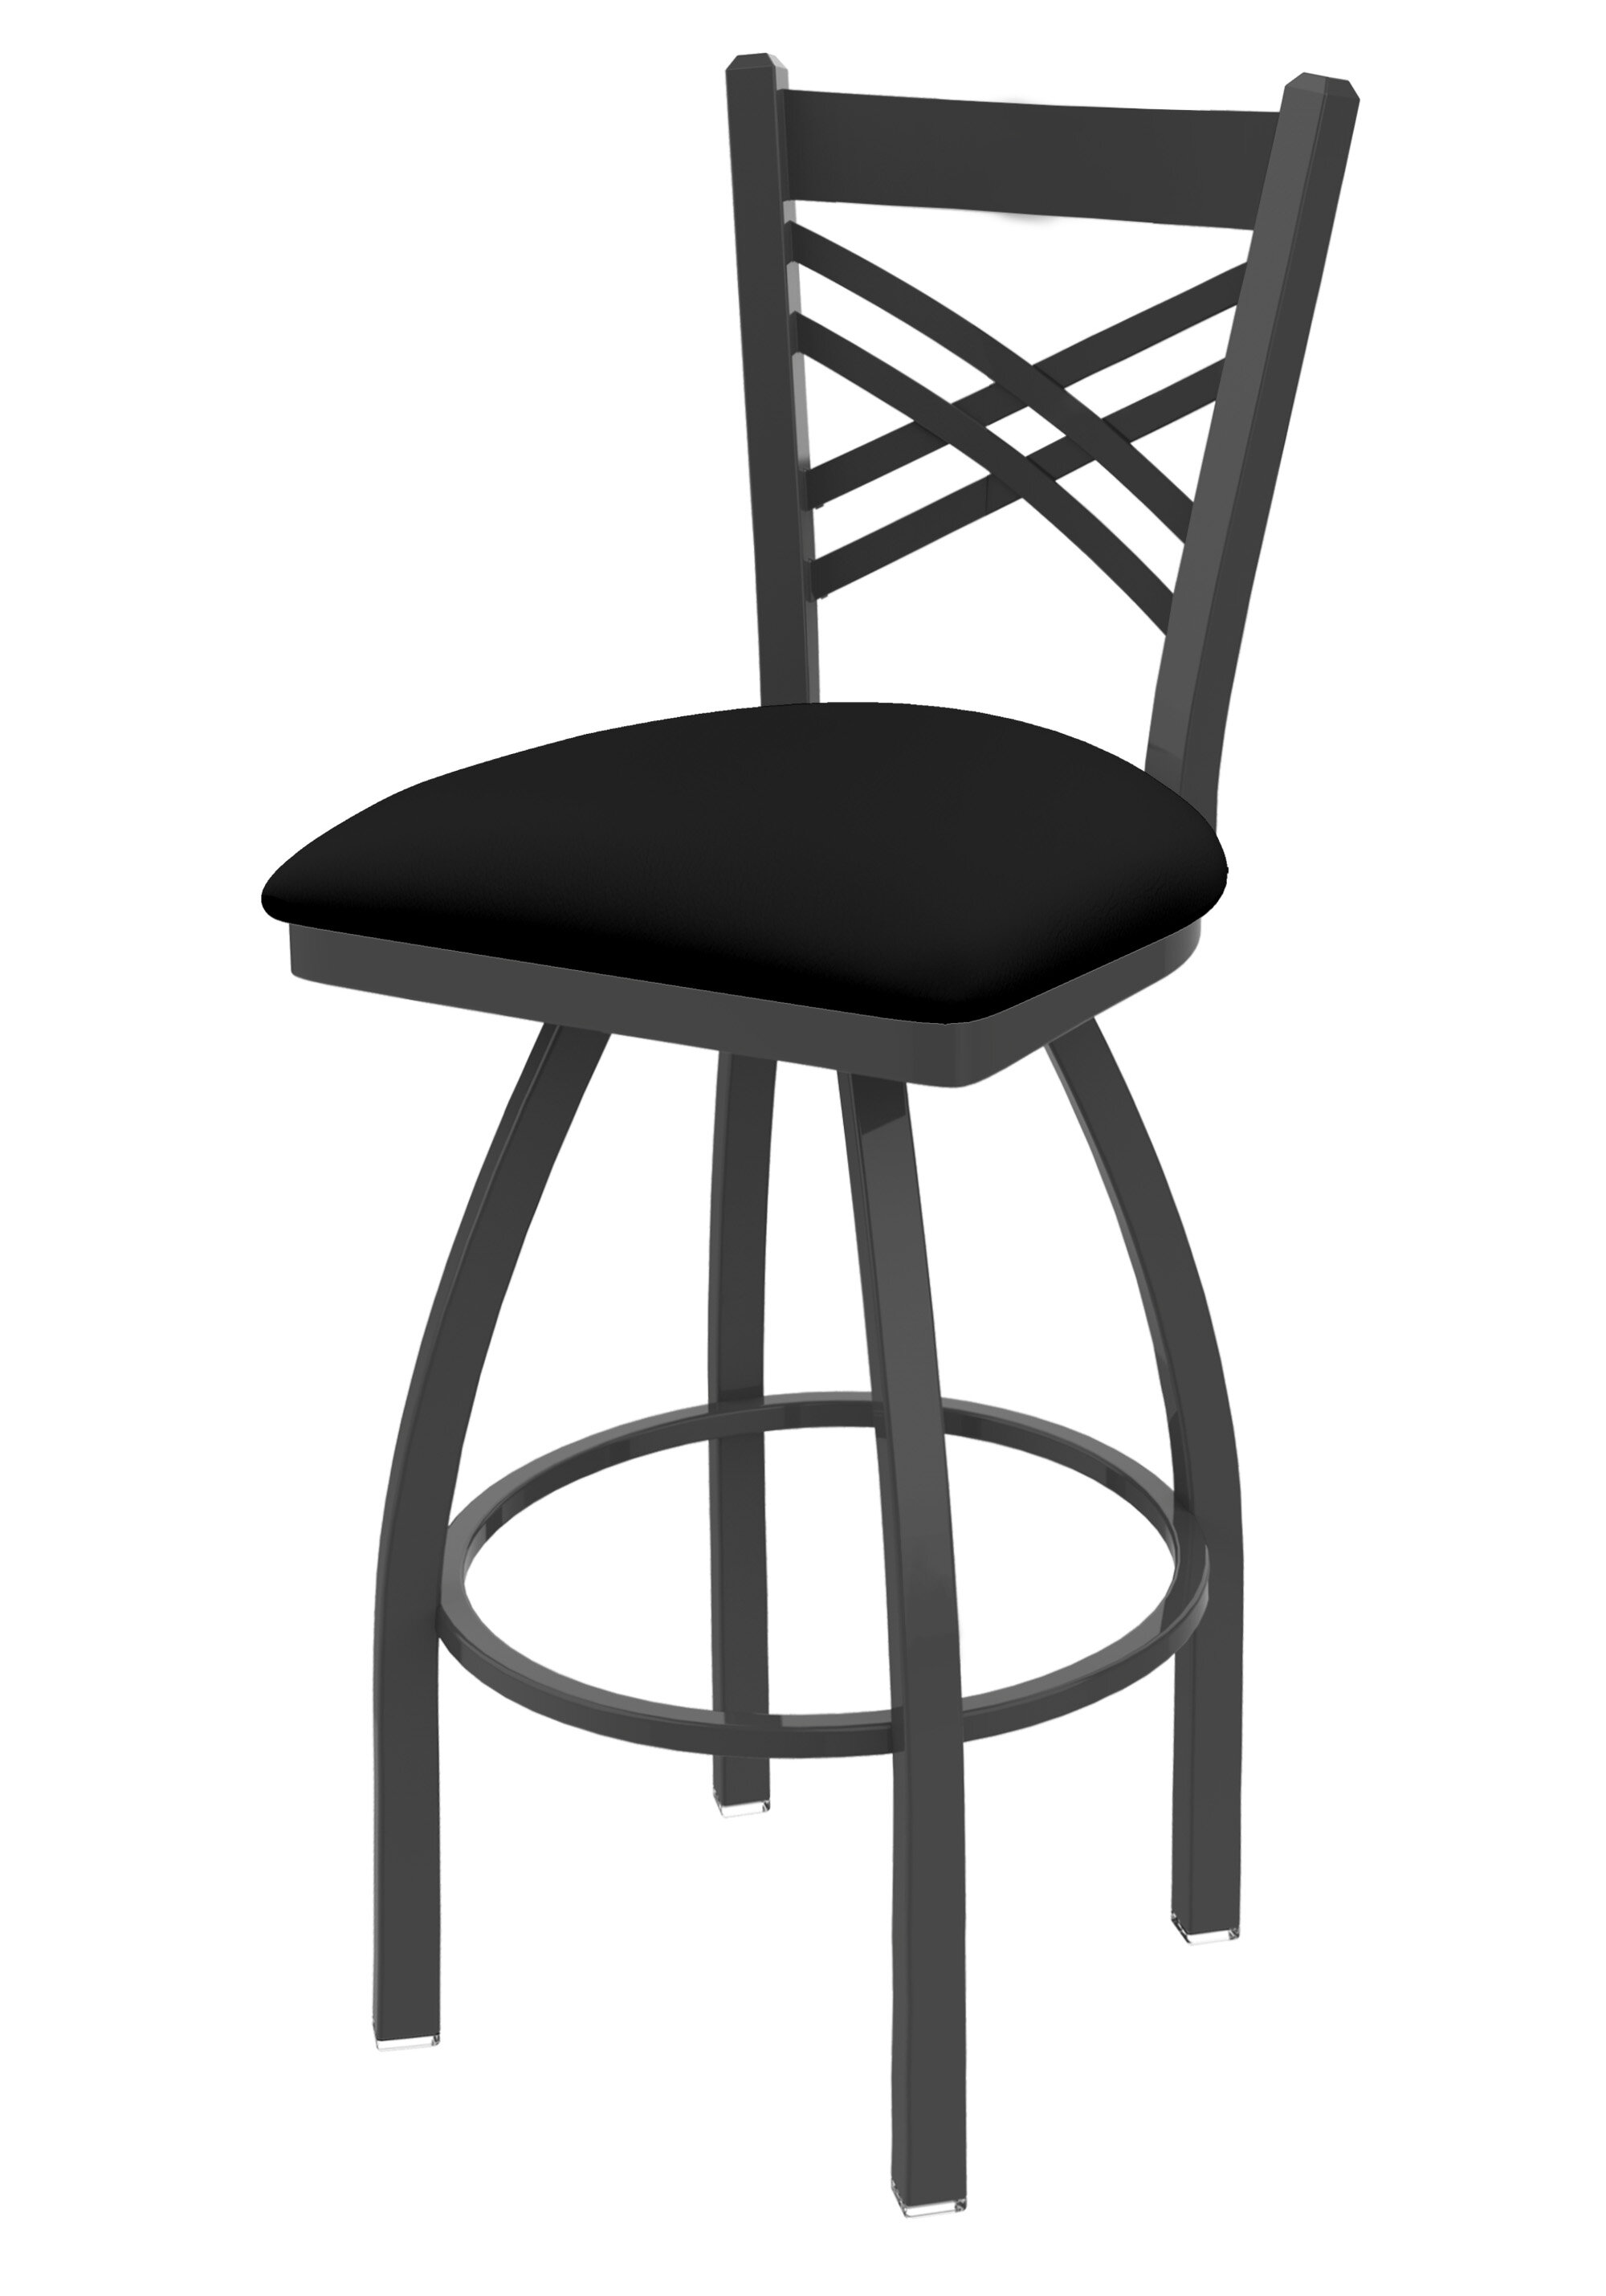 25 L8B2B Black Wrinkle Kentucky Wildcat Swivel Bar Stool with Accent Ring by The Holland Bar Stool Company 